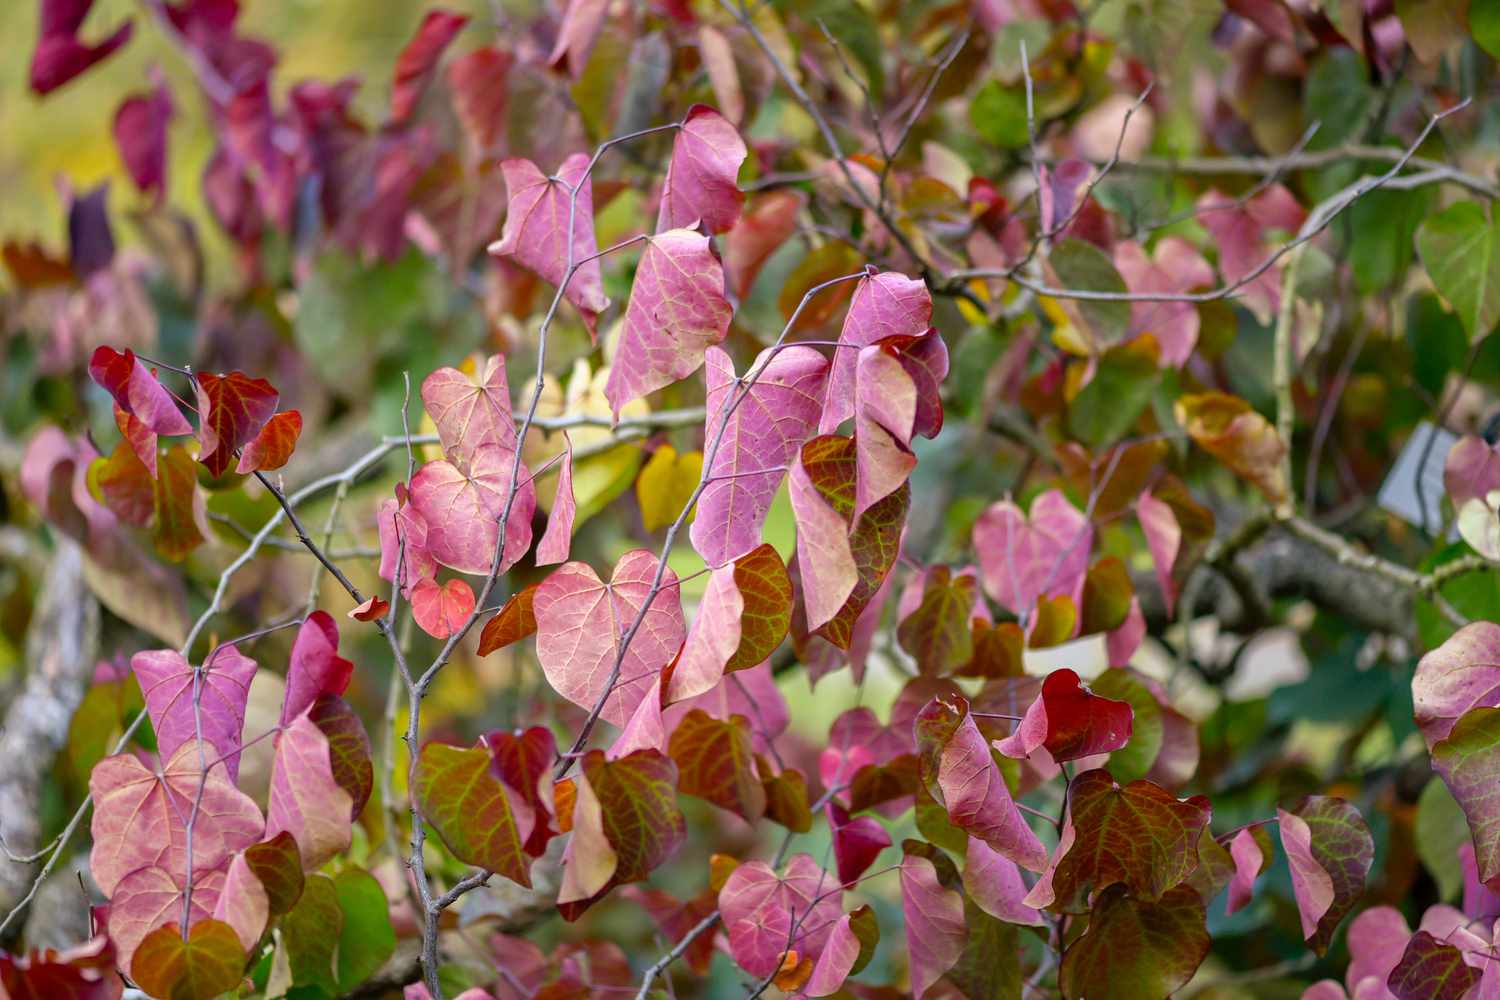 Forest pansy redbud tree branches with pink heart-shaped leaves hanging